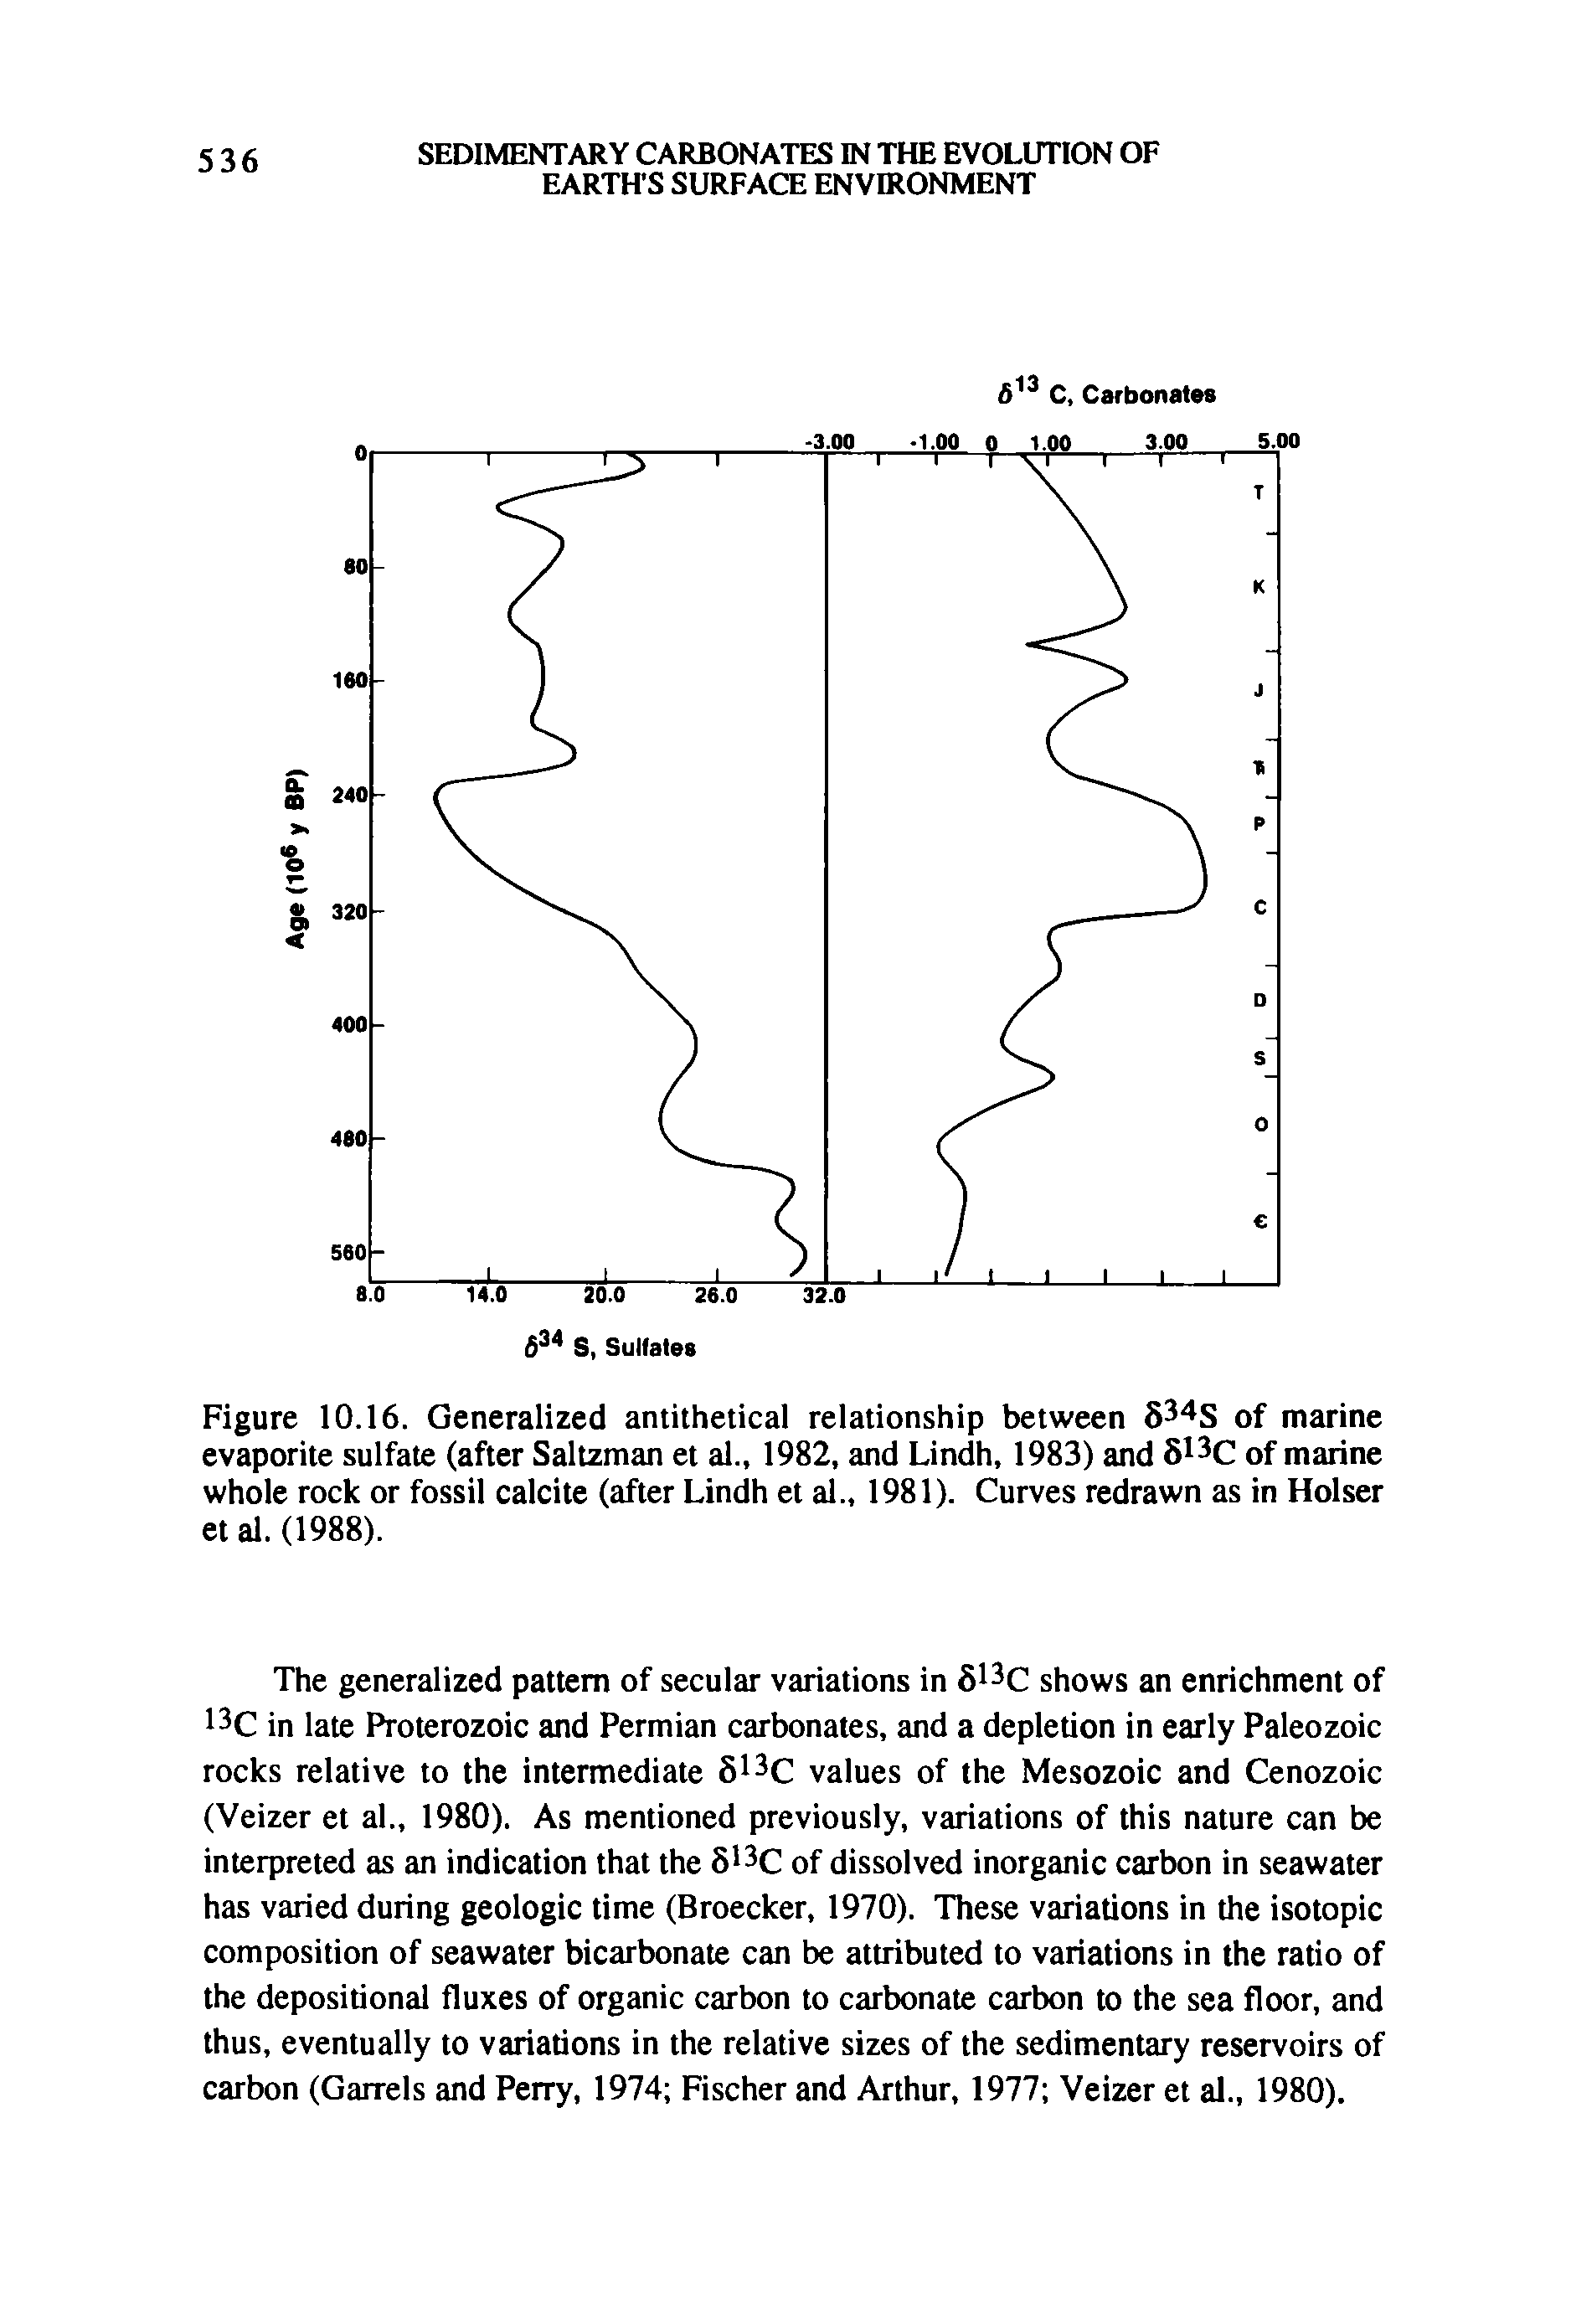 Figure 10.16. Generalized antithetical relationship between 834S of marine evaporite sulfate (after Saltzman et al., 1982, and Lindh, 1983) and 813C of marine whole rock or fossil calcite (after Lindh et al., 1981). Curves redrawn as in Holser et al. (1988).